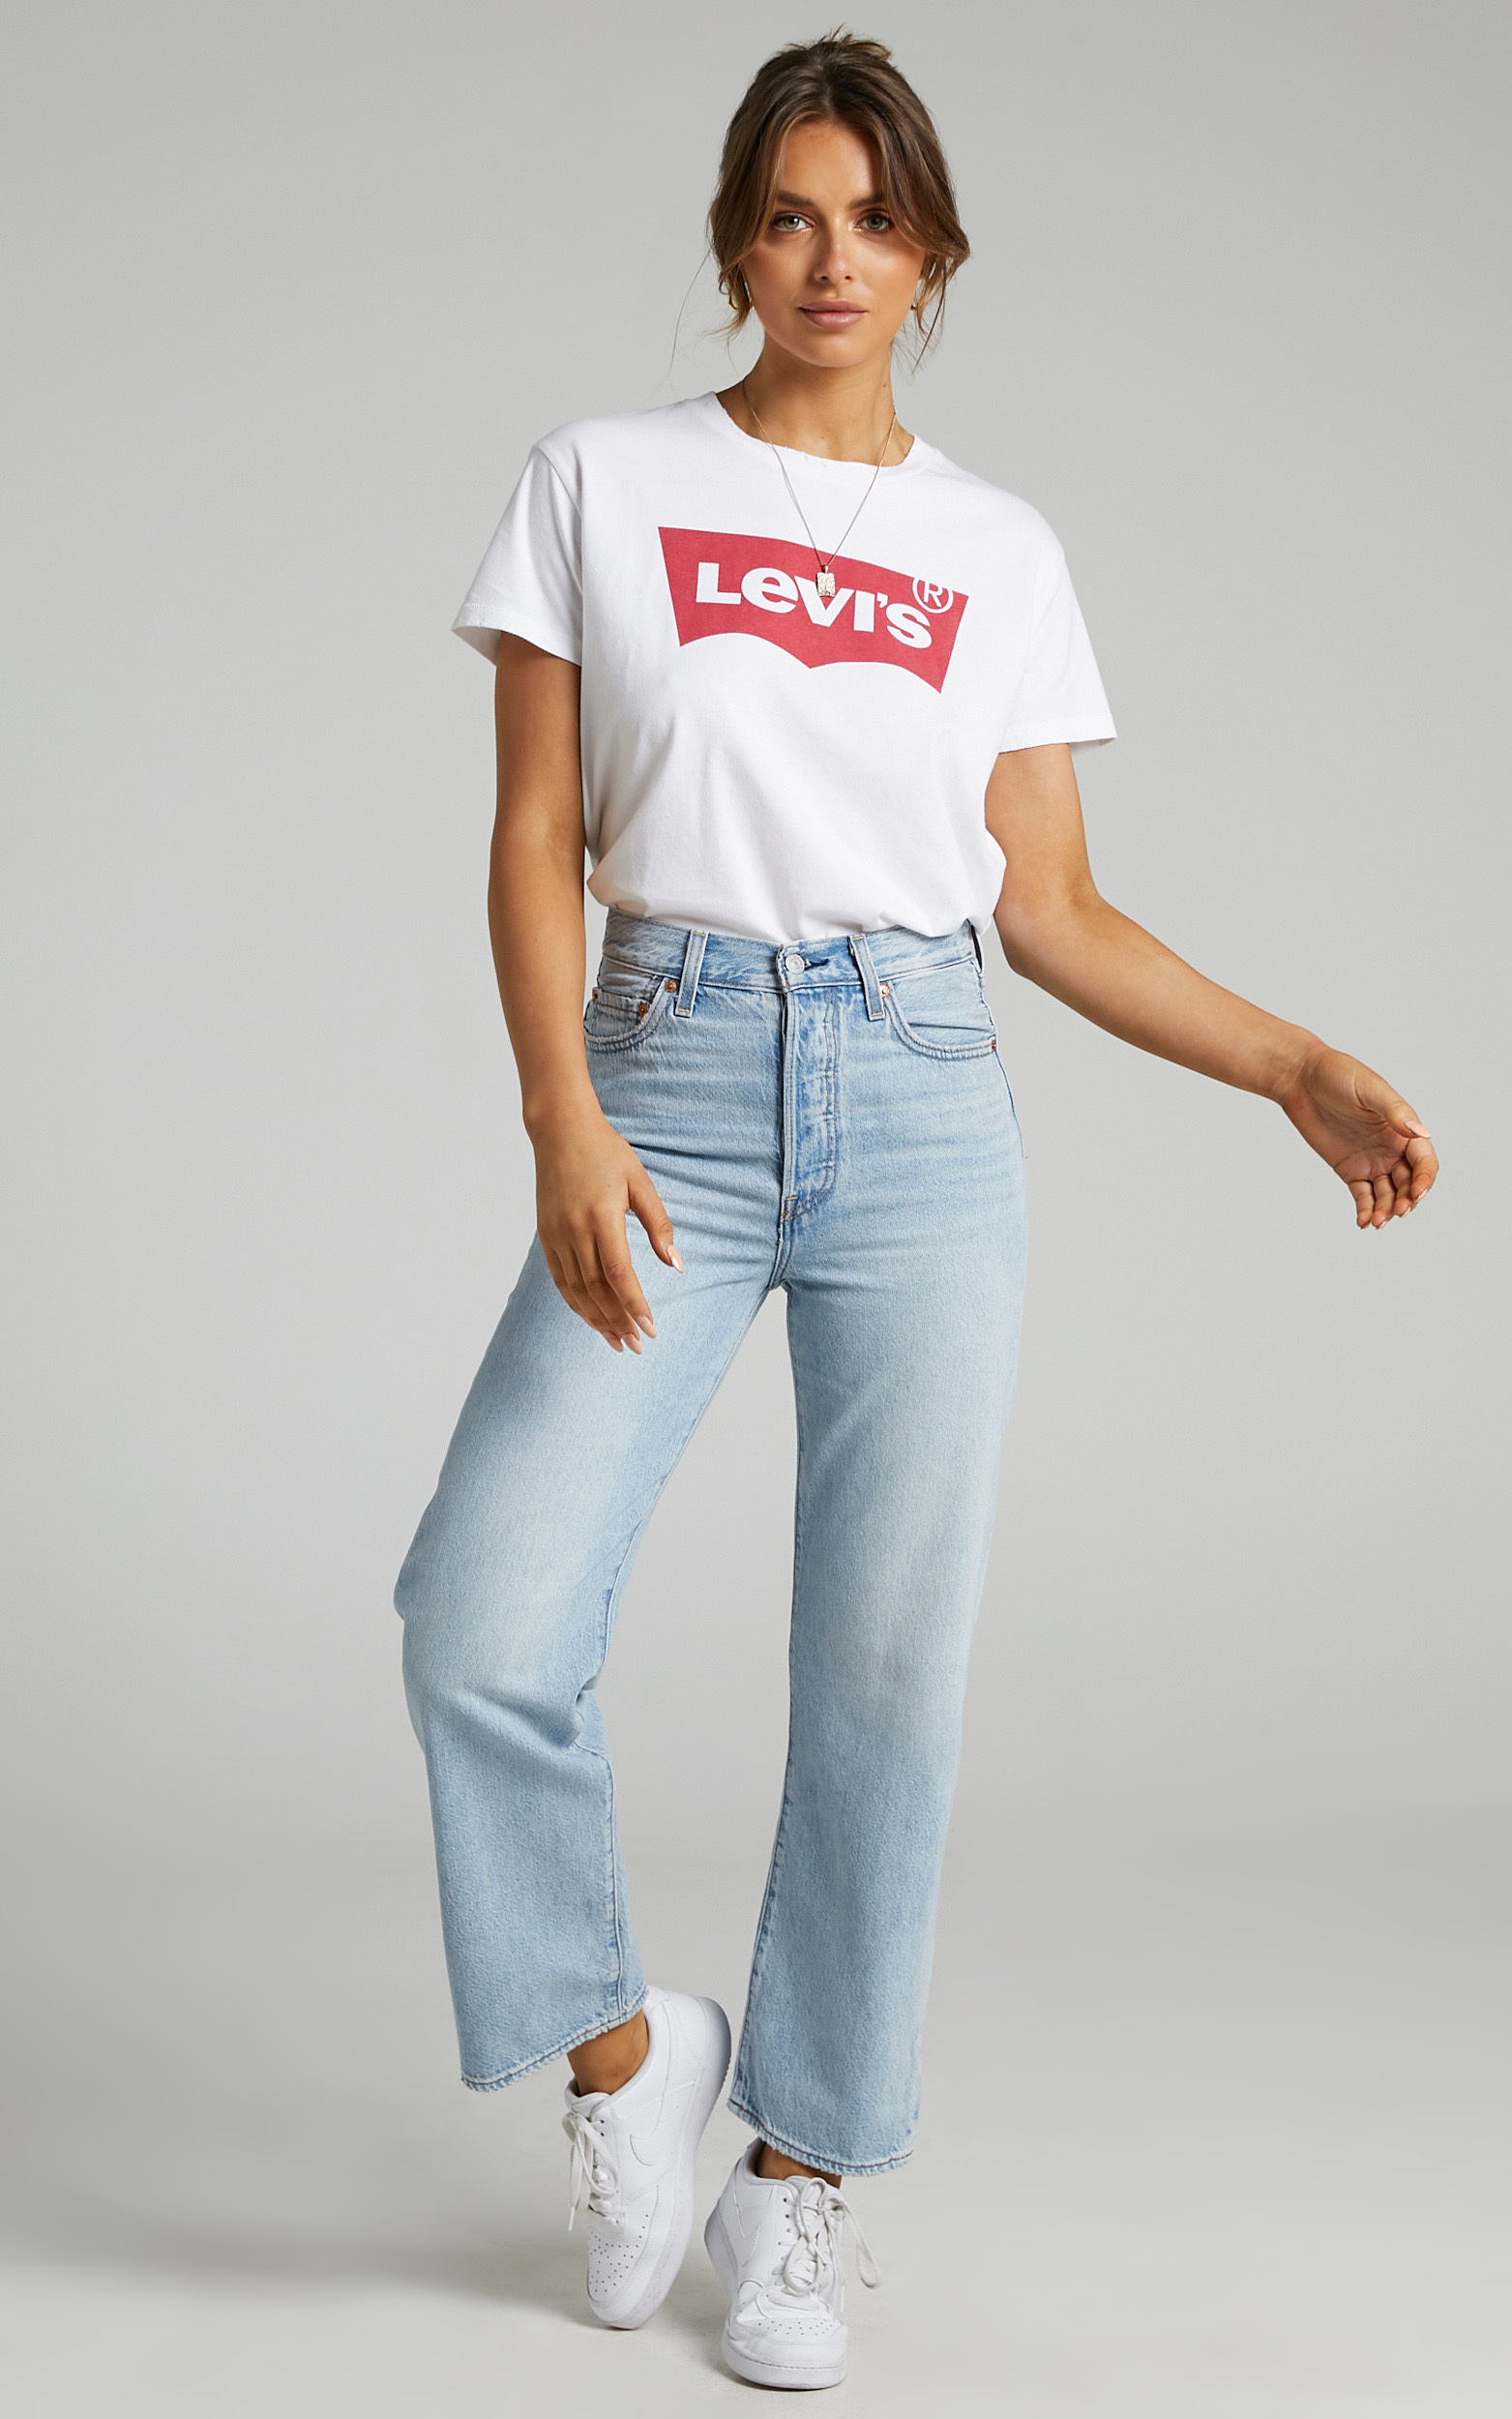 Levis - Ribcage Straight Jean in Middle Road | Showpo